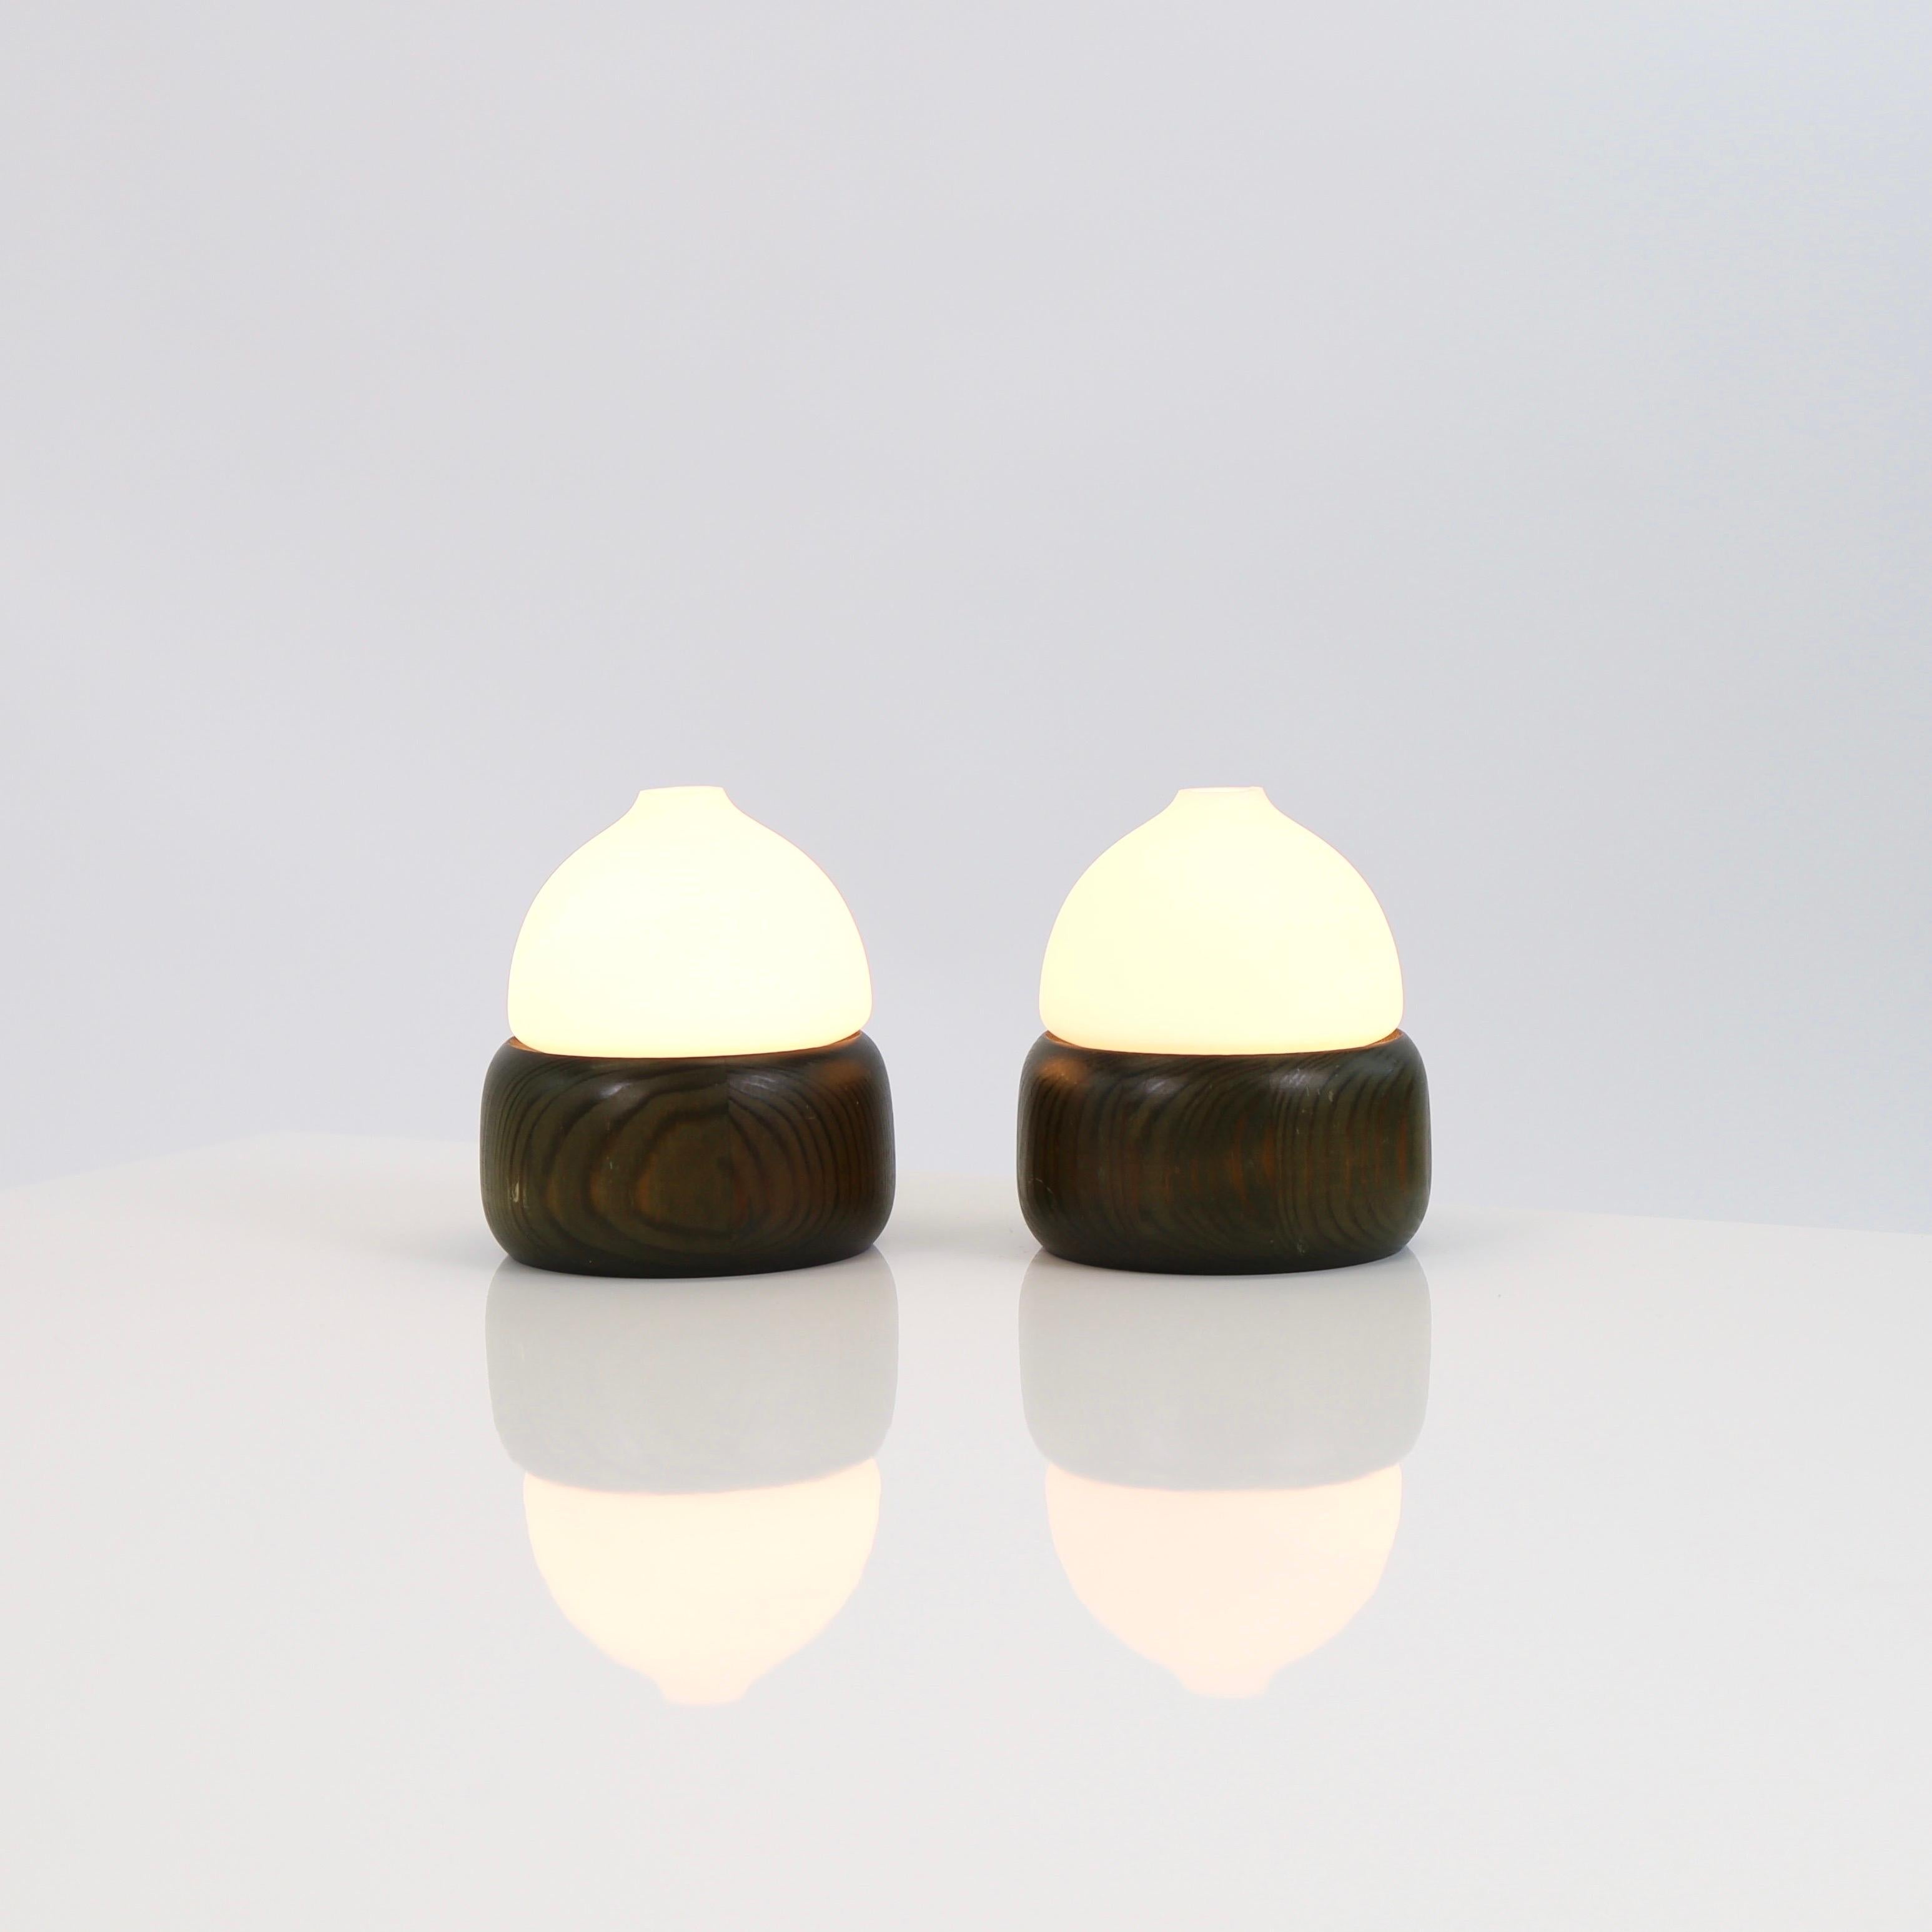 Late 20th Century Set of Swedish Pine Wood Night Lamps by Aneta, Sweden, 1970s For Sale